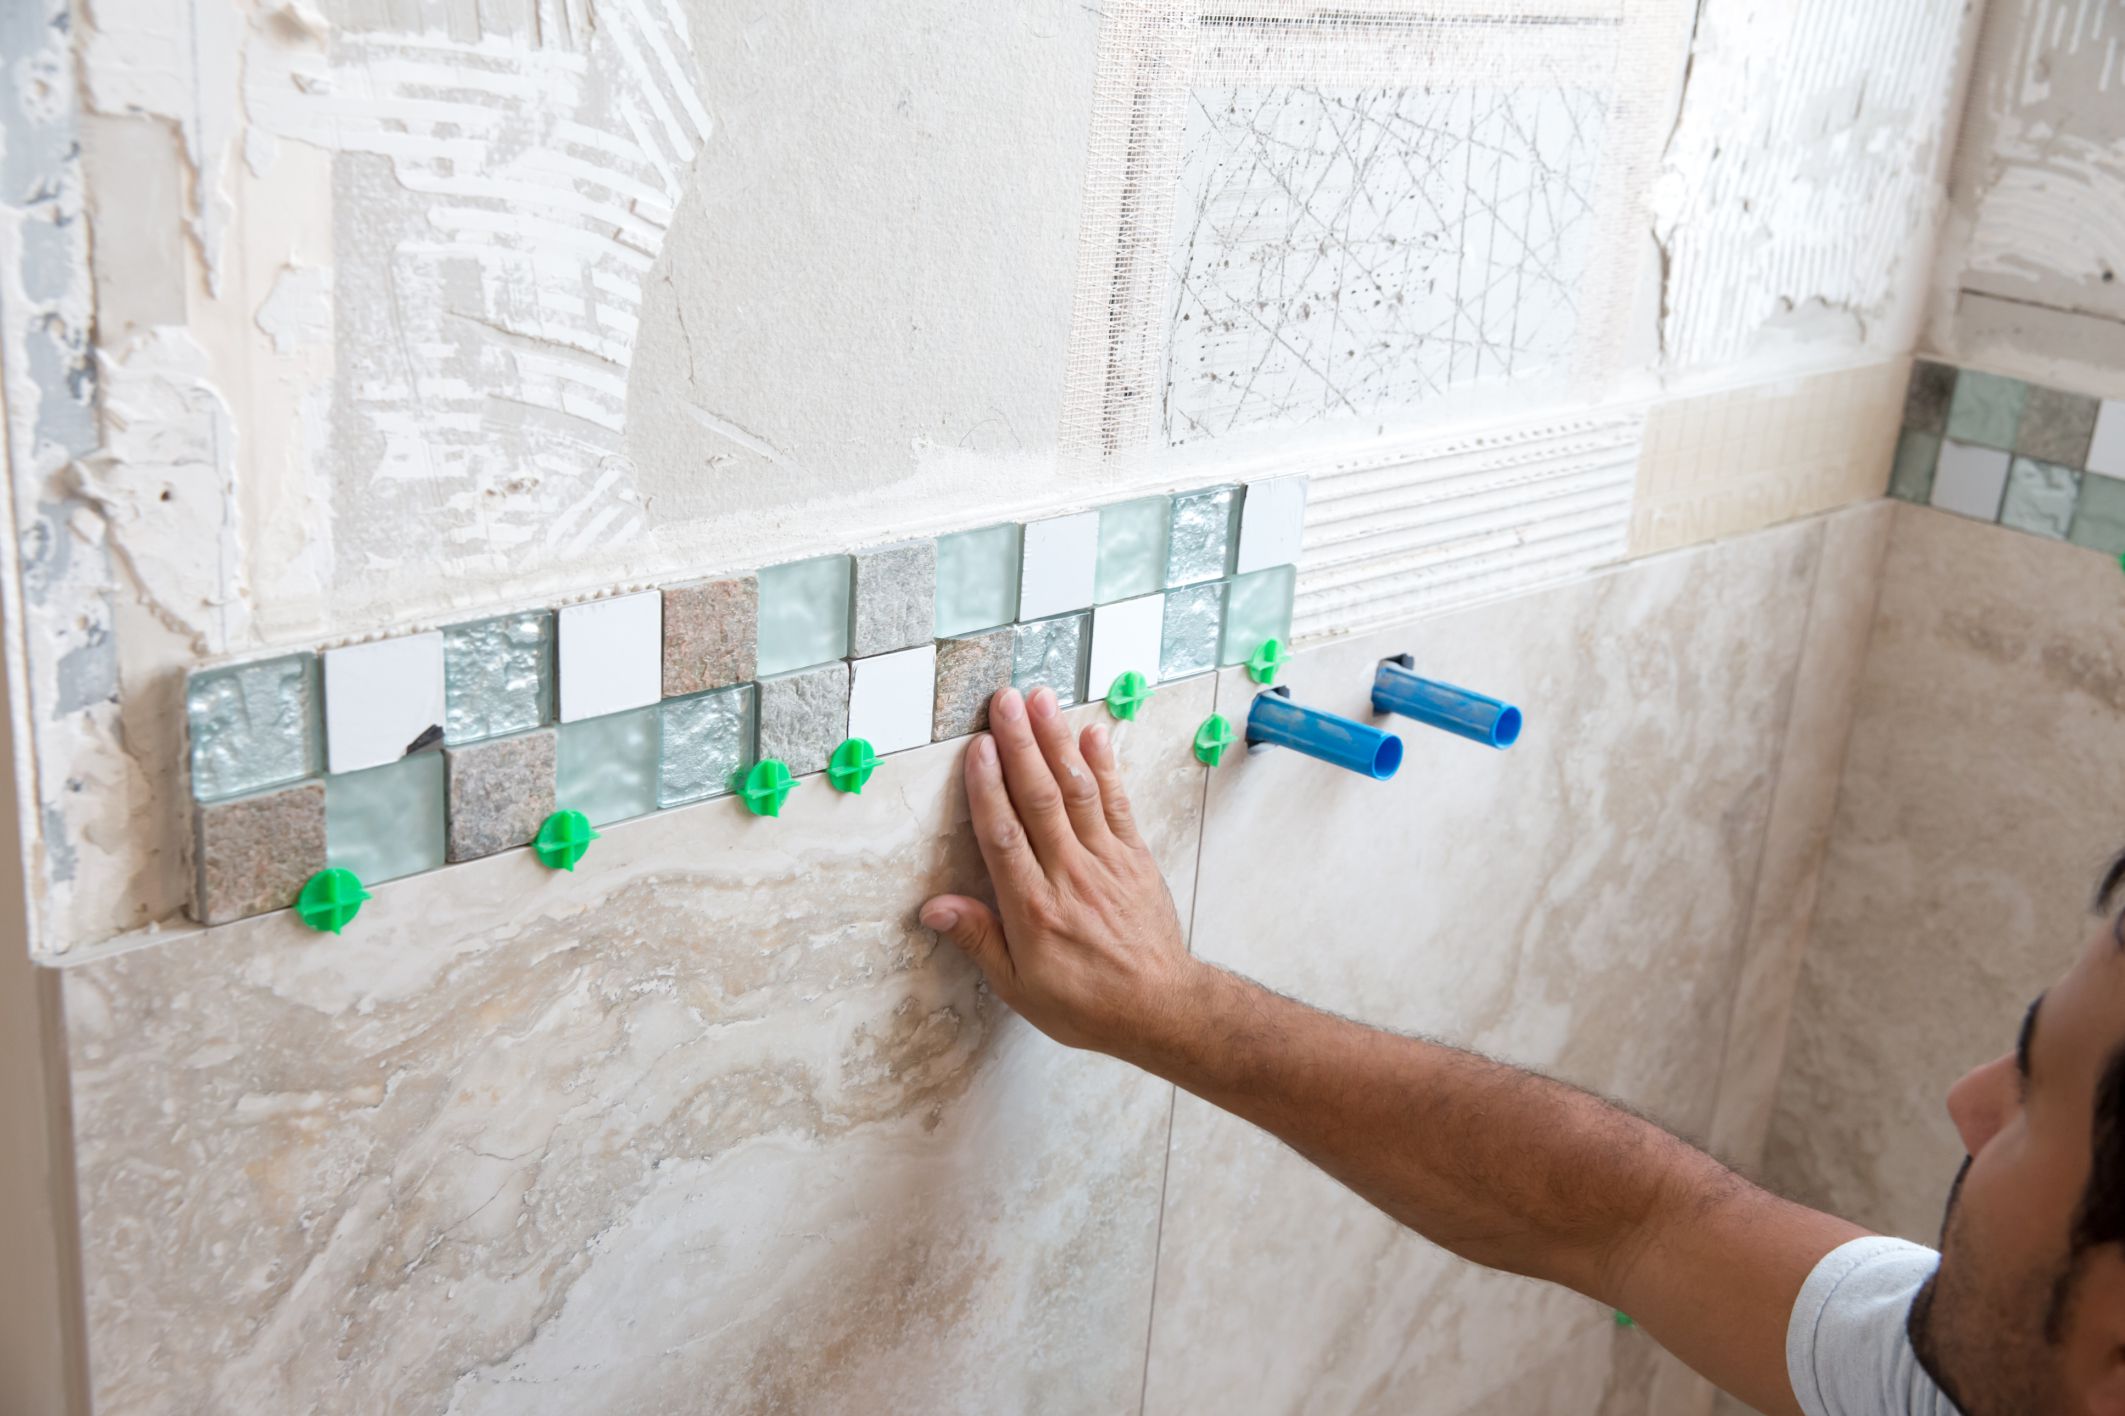 How To Tile In A Shower: Step-by-step